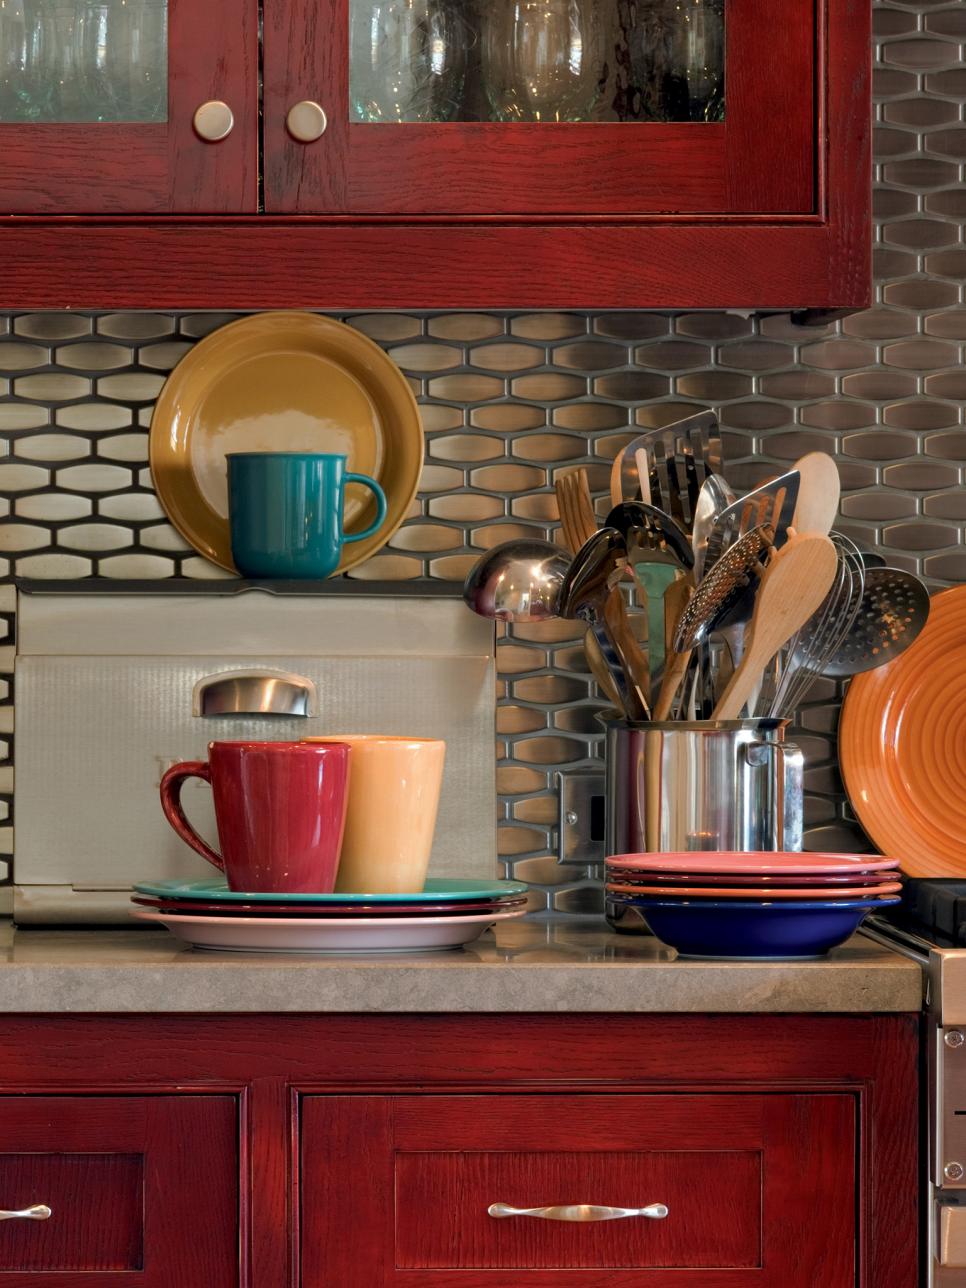 Warm Red Cabinets, Colorful Dishes, Stainless Steel Backsplash